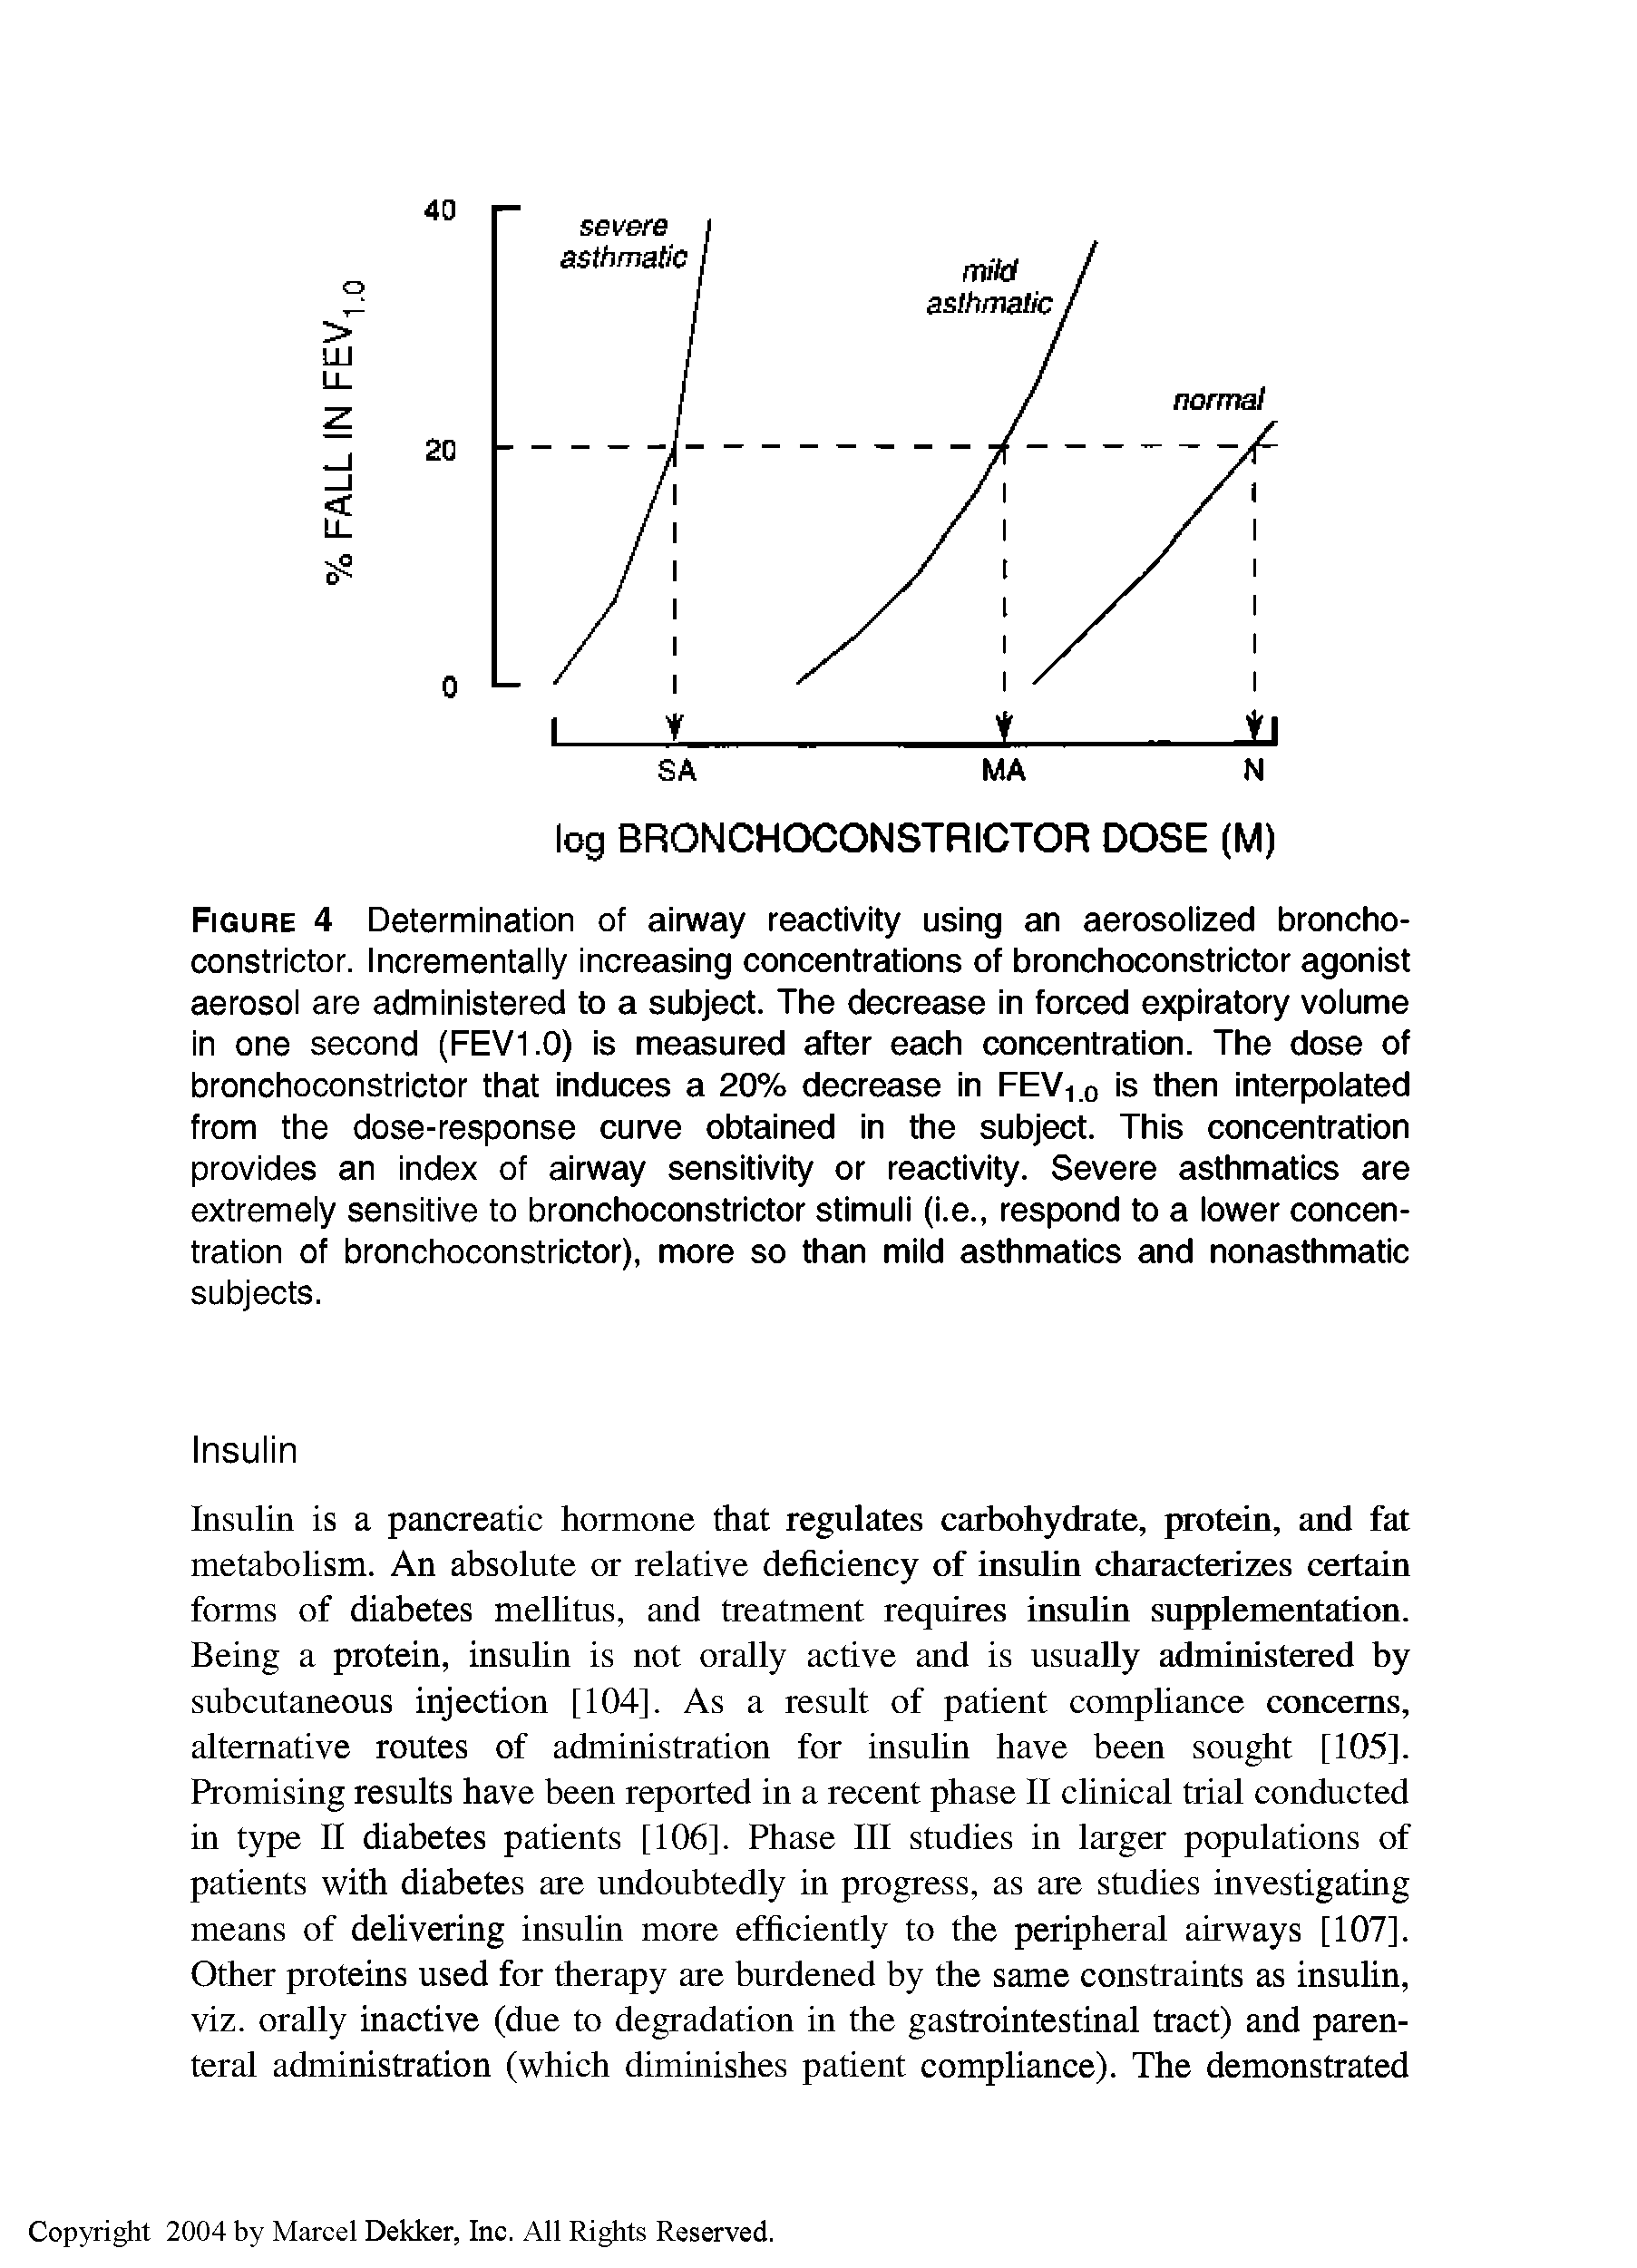 Figure 4 Determination of airway reactivity using an aerosolized broncho-constrictor. Incrementally increasing concentrations of bronchoconstrictor agonist aerosol are administered to a subject. The decrease in forced expiratory volume in one second (FEV1.0) is measured after each concentration. The dose of bronchoconstrictor that induces a 20% decrease in FEV10 is then interpolated from the dose-response curve obtained in the subject. This concentration provides an index of airway sensitivity or reactivity. Severe asthmatics are extremely sensitive to bronchoconstrictor stimuli (i.e., respond to a lower concentration of bronchoconstrictor), more so than mild asthmatics and nonasthmatic subjects.